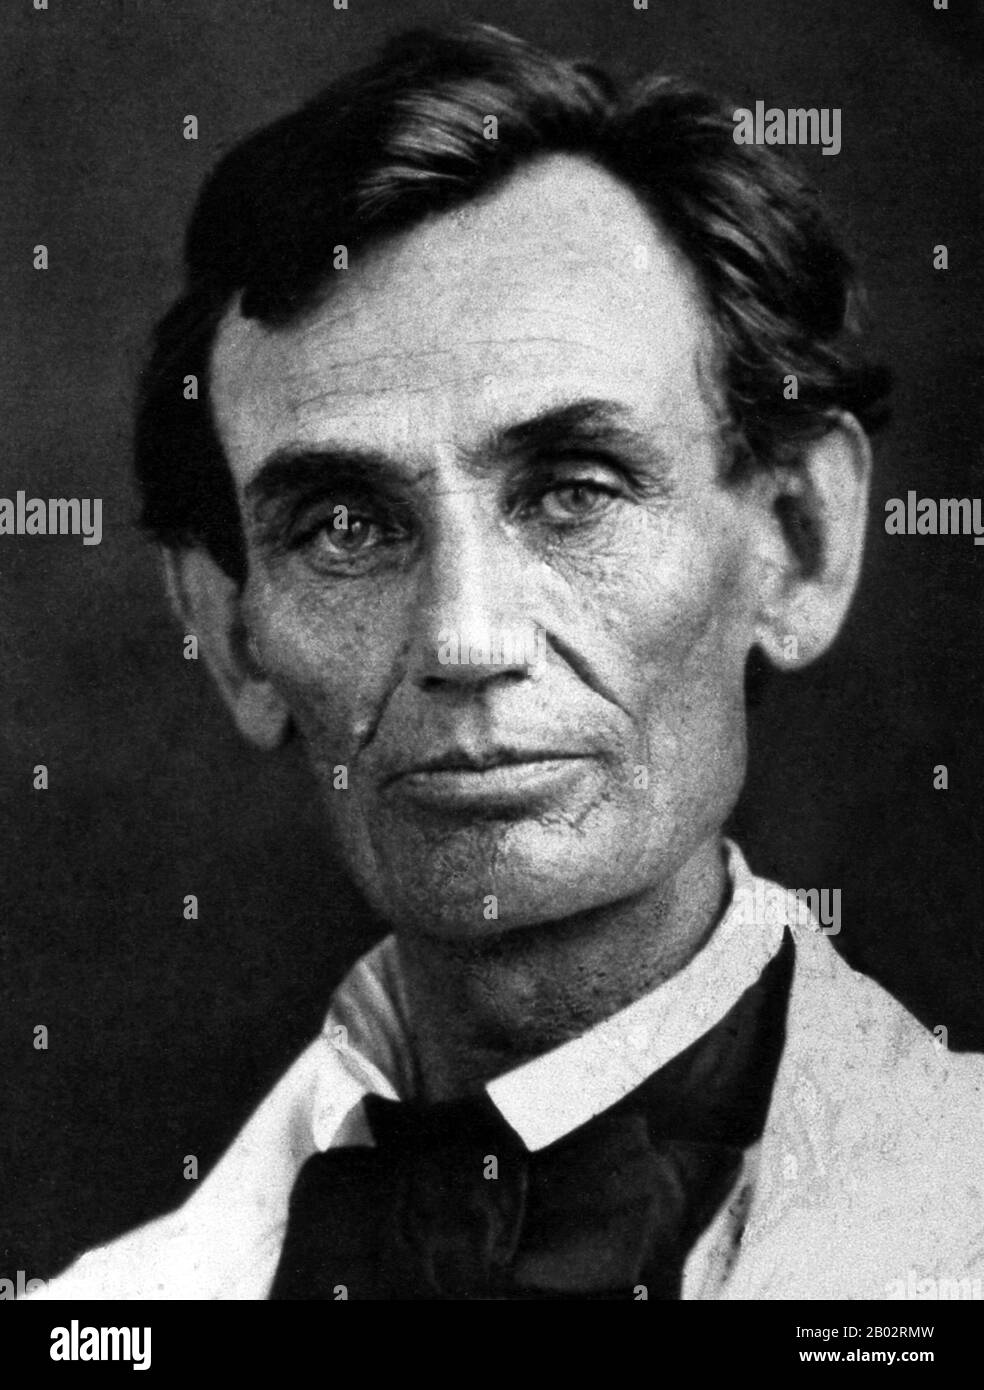 Abraham Lincoln (February 12, 1809 – April 15, 1865) was the 16th President of the United States, serving from March 1861 until his assassination in April 1865.  Lincoln led the United States through its Civil War—its bloodiest war and its greatest moral, constitutional and political crisis. In doing so, he preserved the Union, abolished slavery, strengthened the federal government, and modernized the economy. Stock Photo